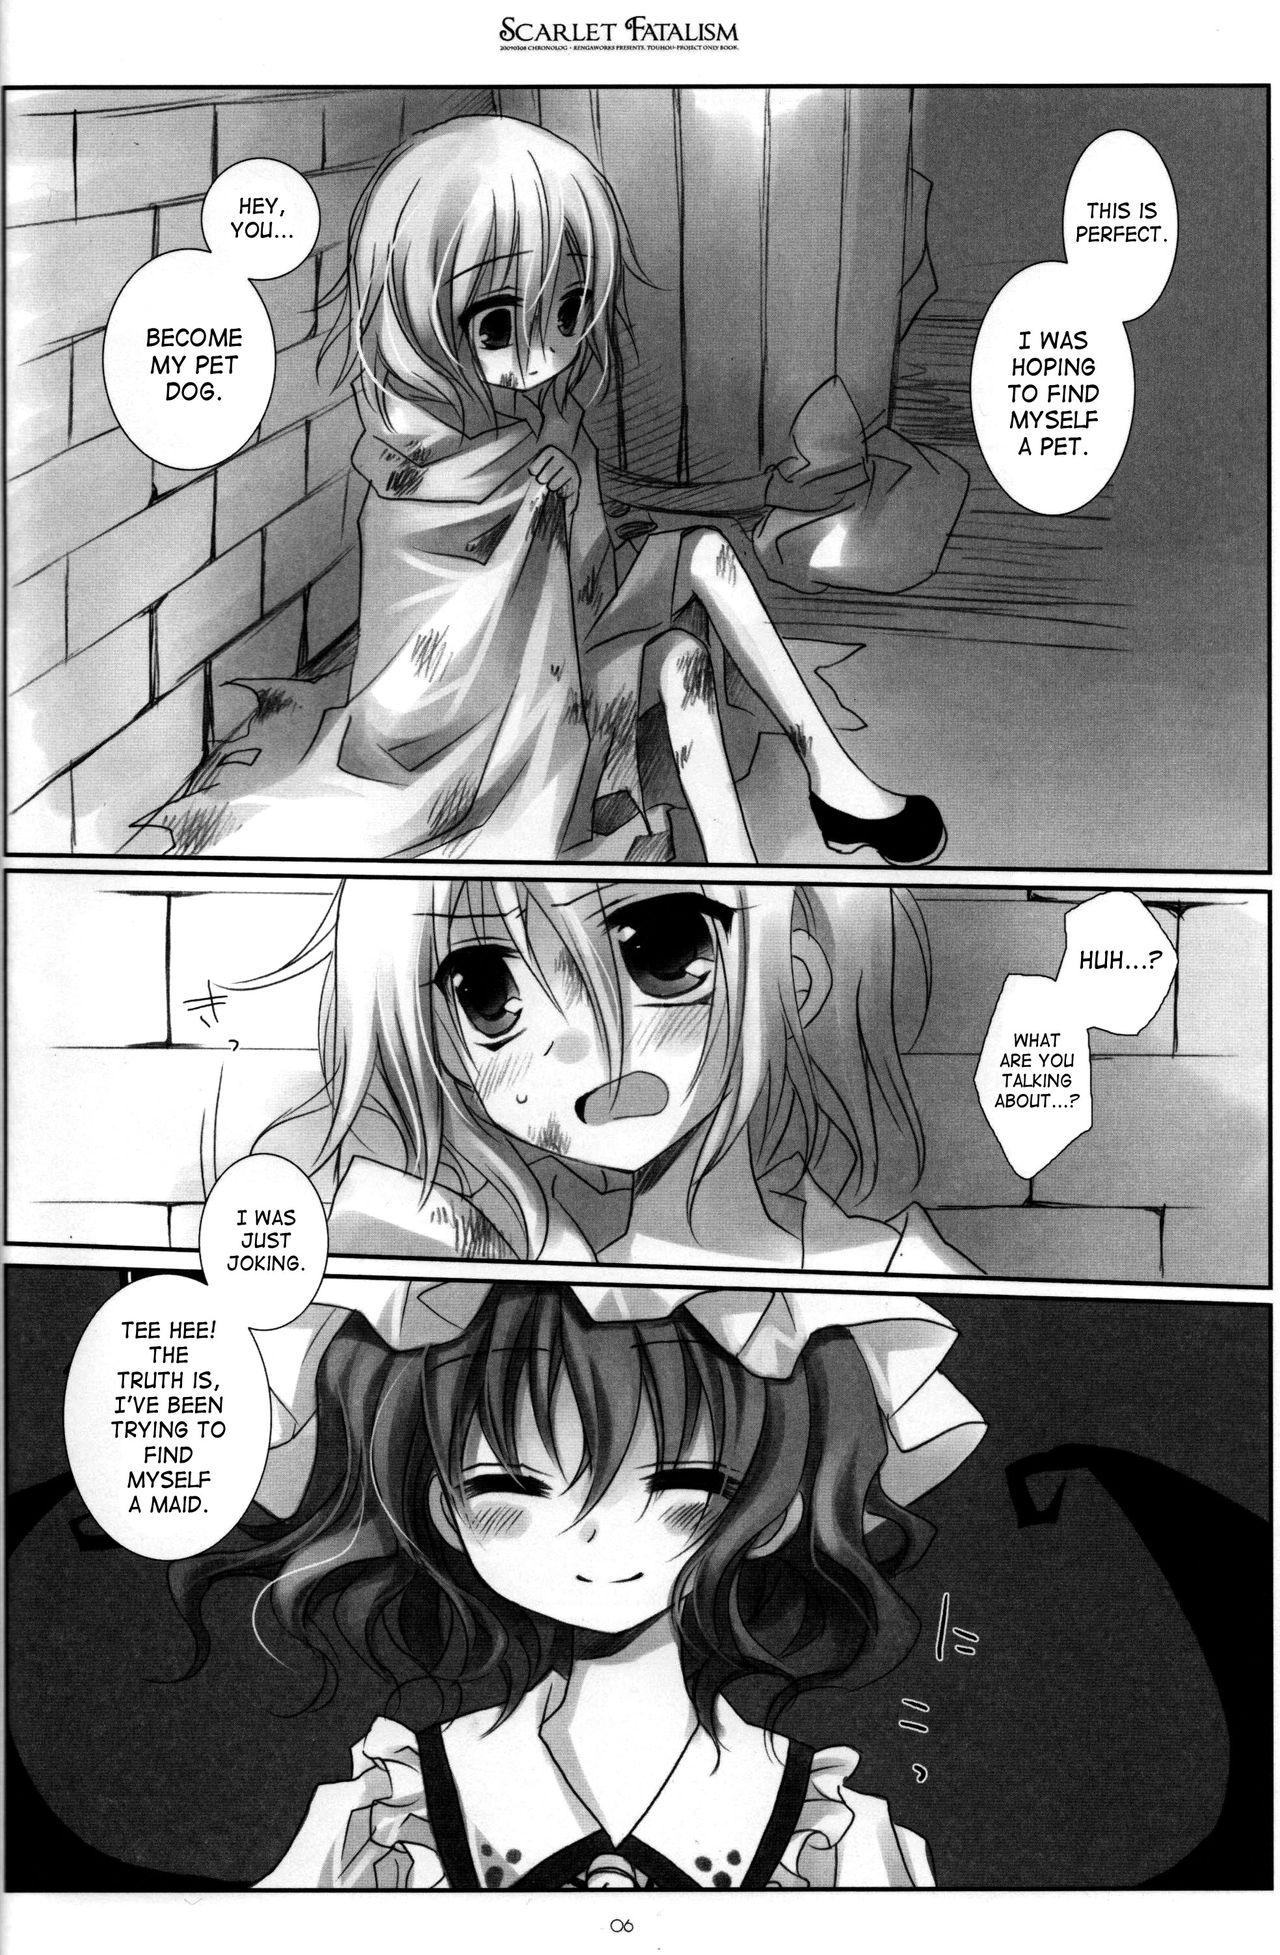 Petera Scarlet Fatalism - Touhou project Trap - Page 7